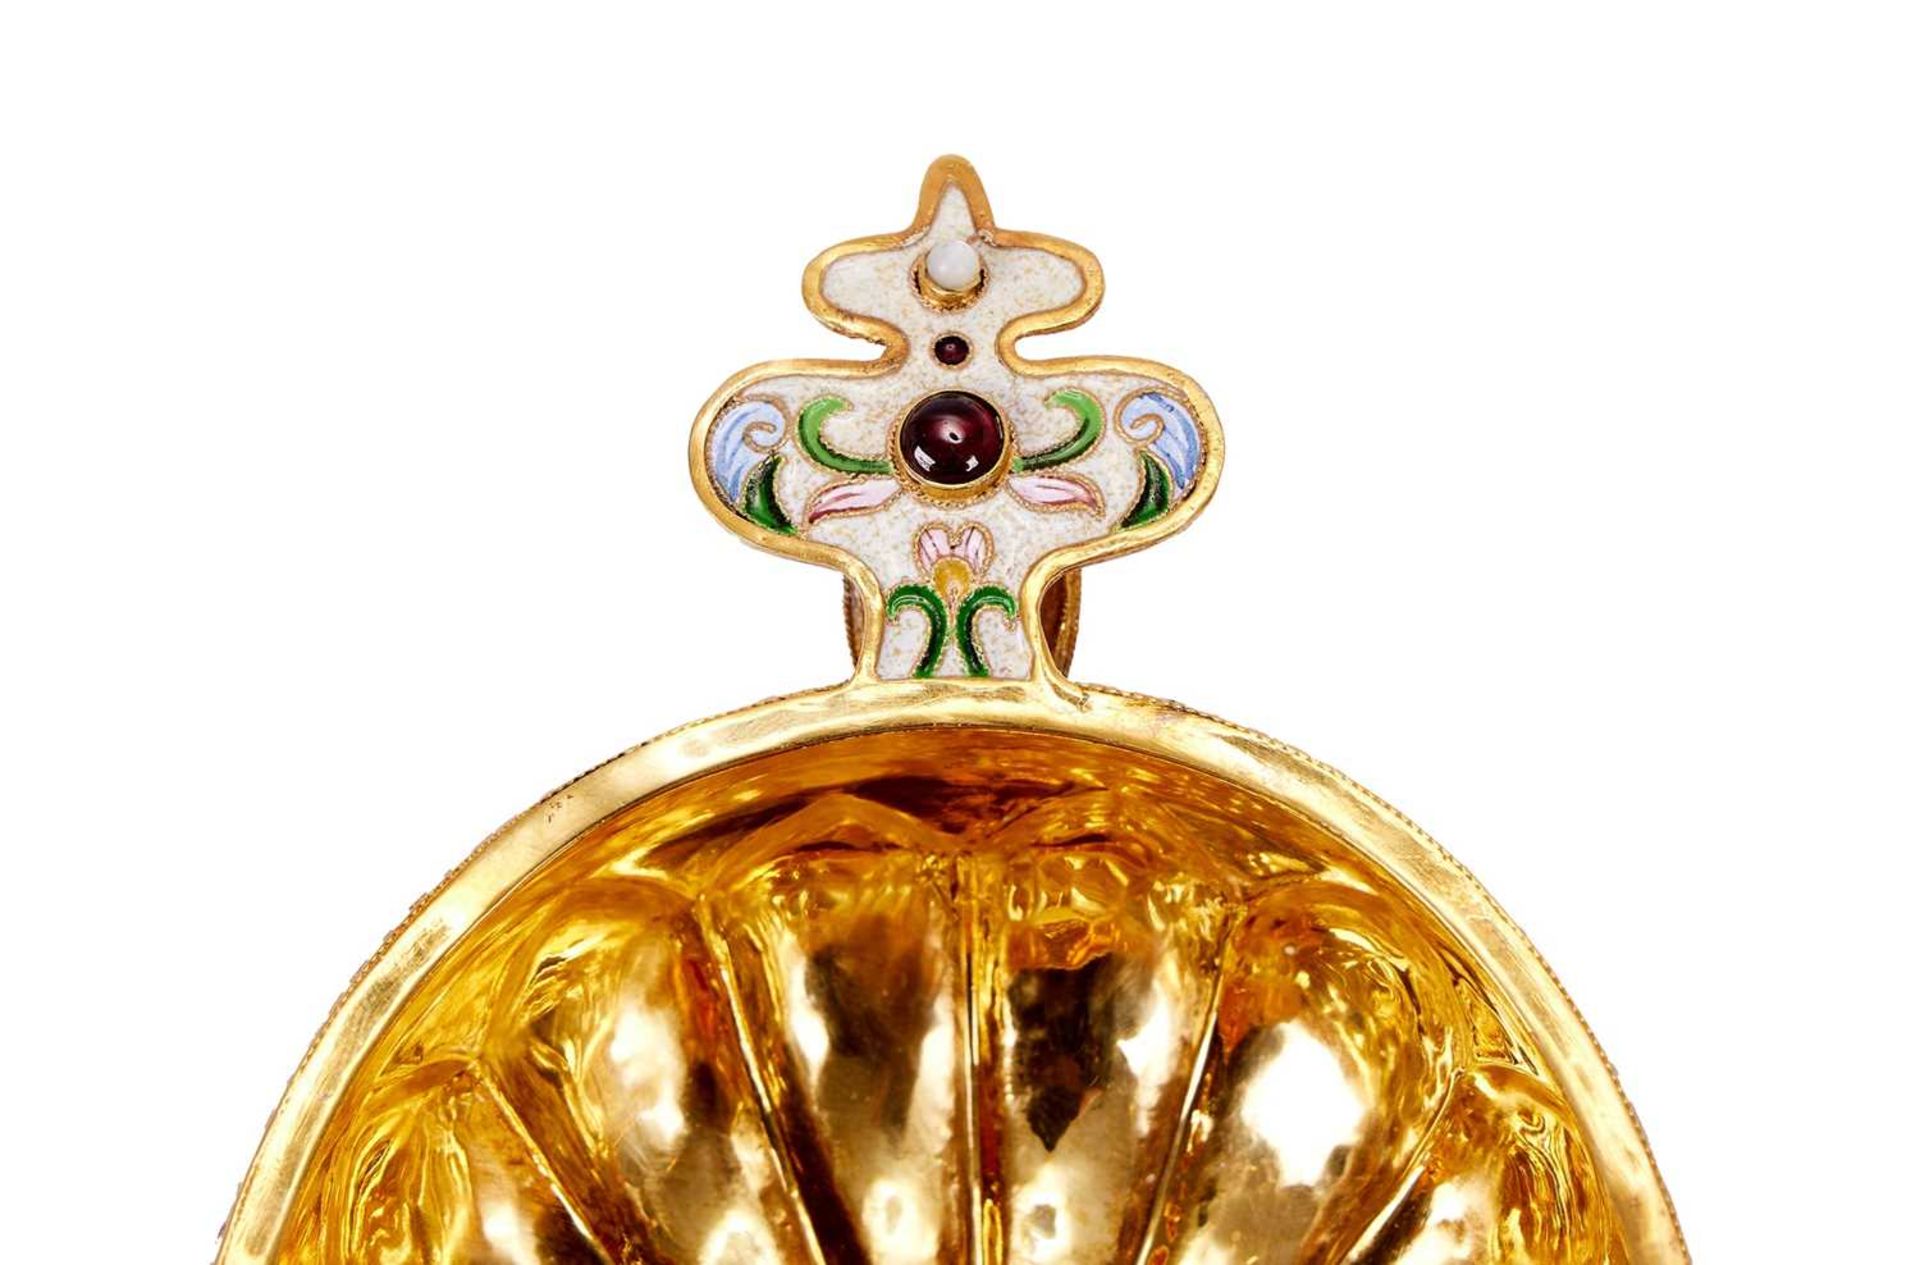 A SILVER GILT, ENAMEL AND GEM SET RUSSIAN STYLE KOVSH - Image 4 of 4